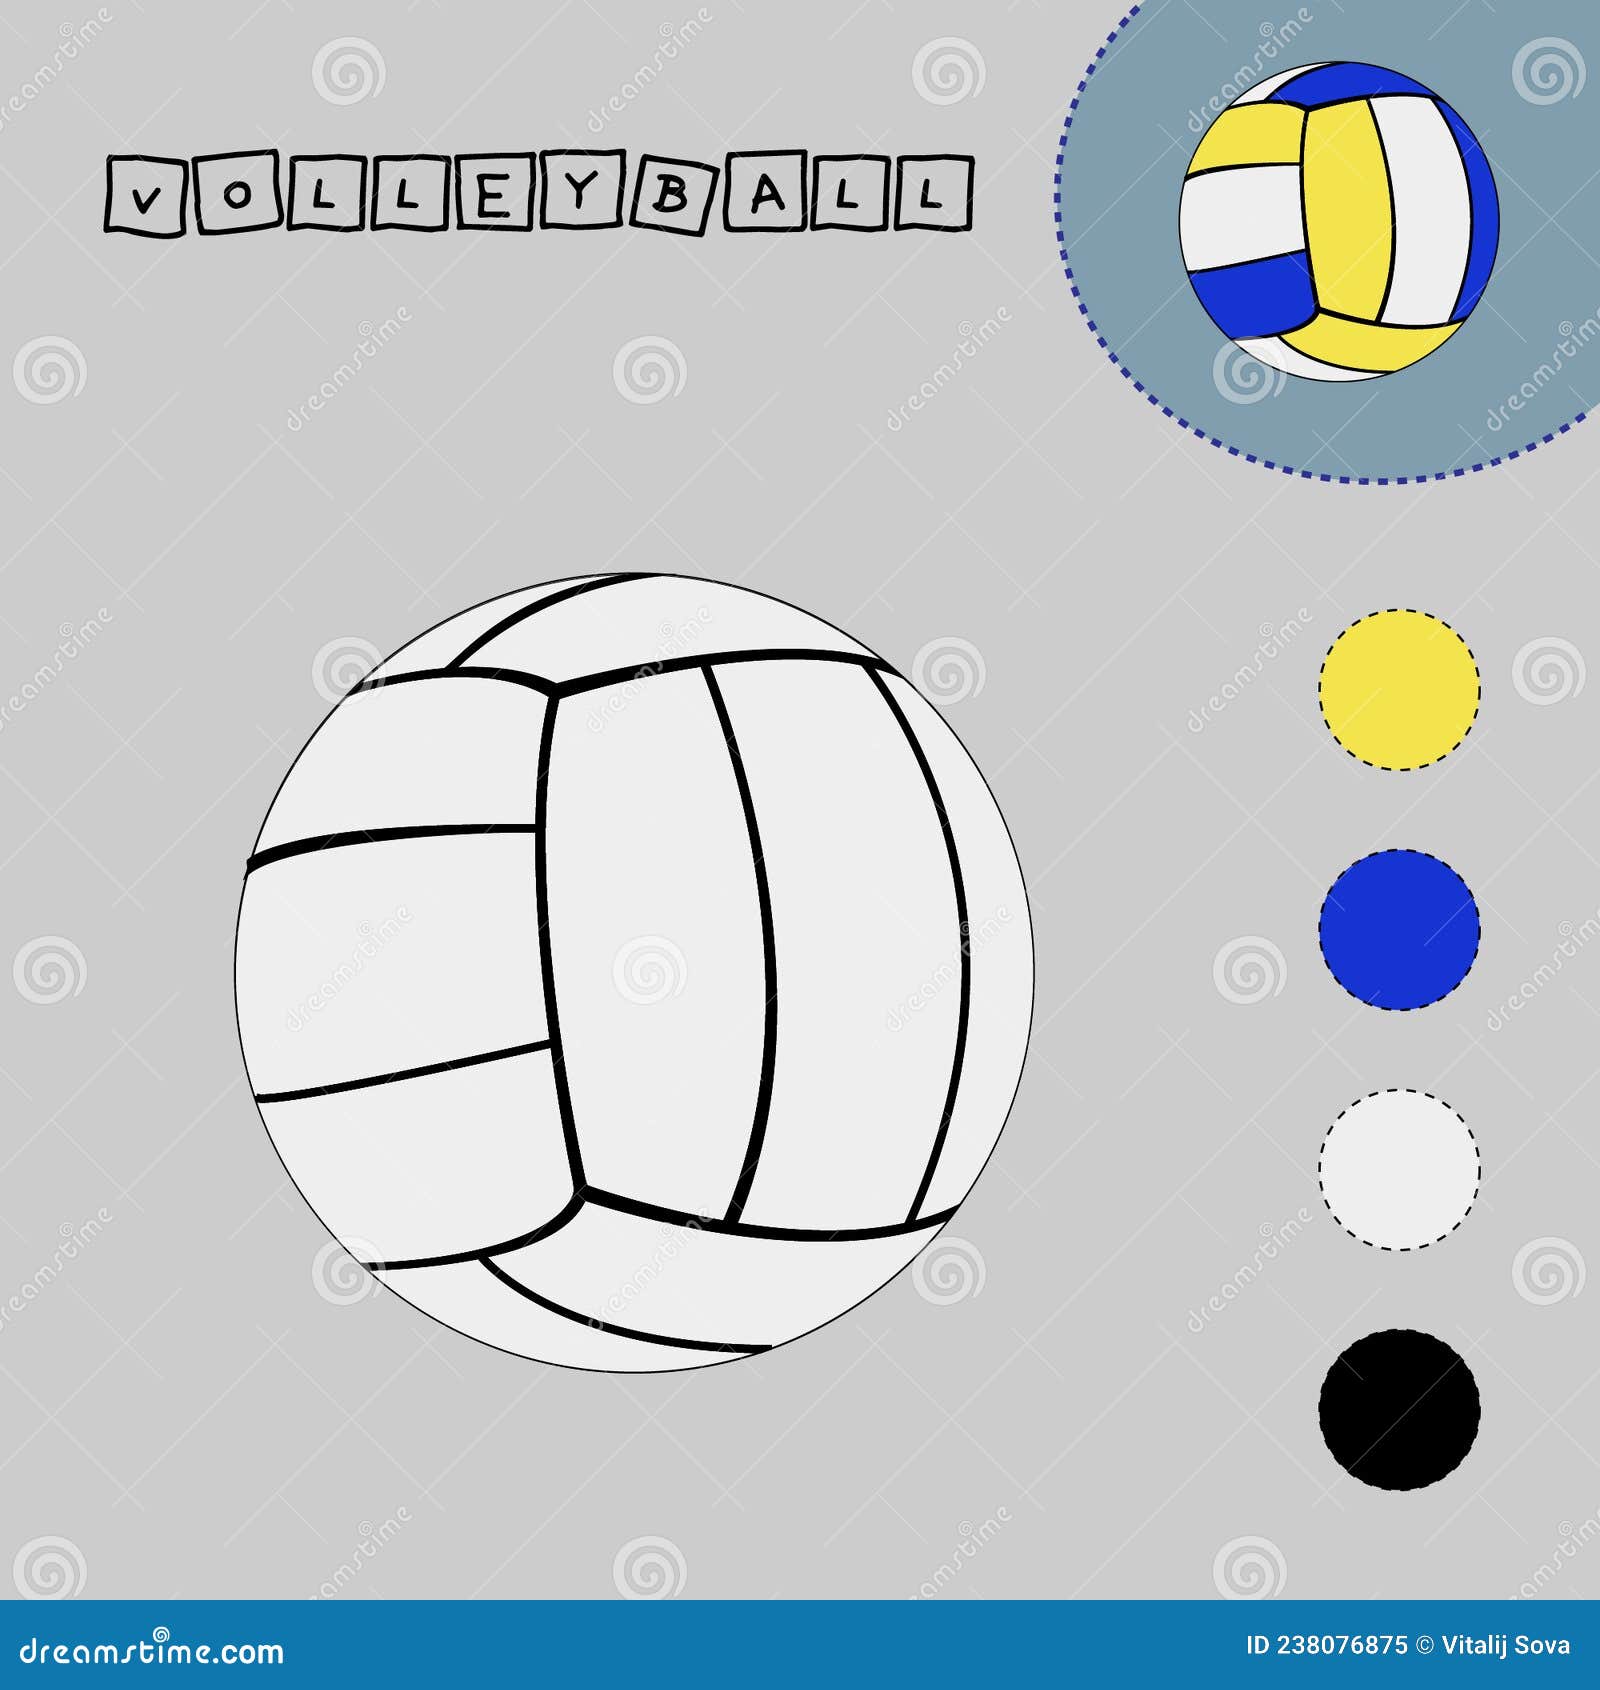 Book coloring volleyball stock illustrations â book coloring volleyball stock illustrations vectors clipart